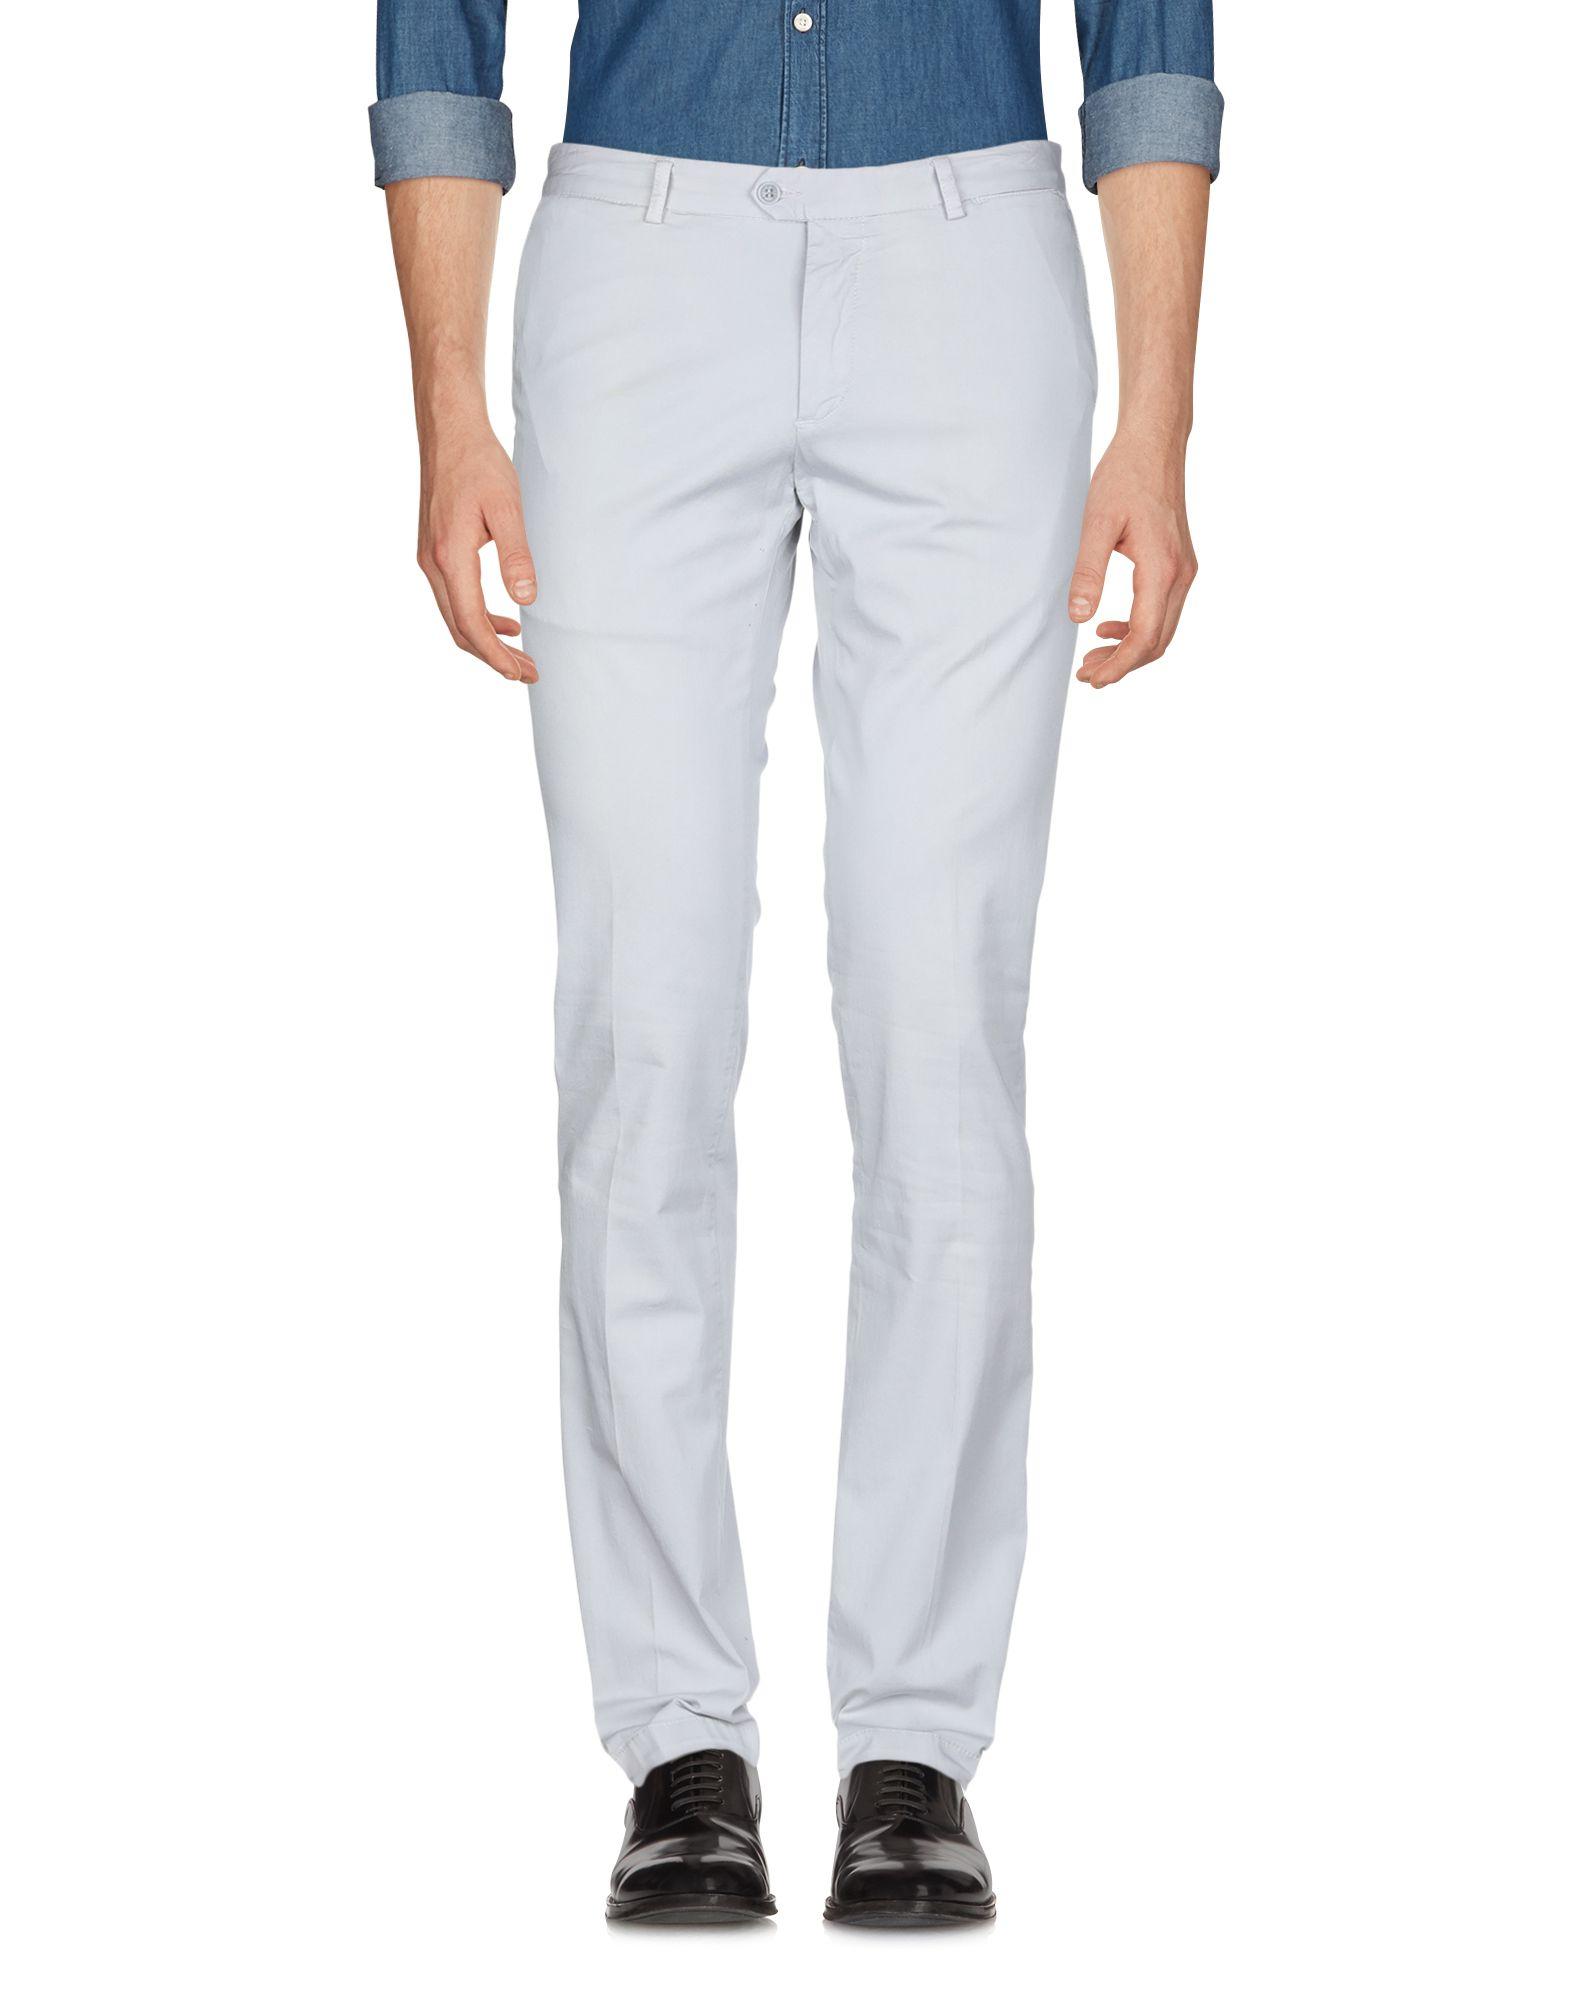 Paul & Shark Cotton Casual Pants in Light Grey (Gray) for Men - Lyst